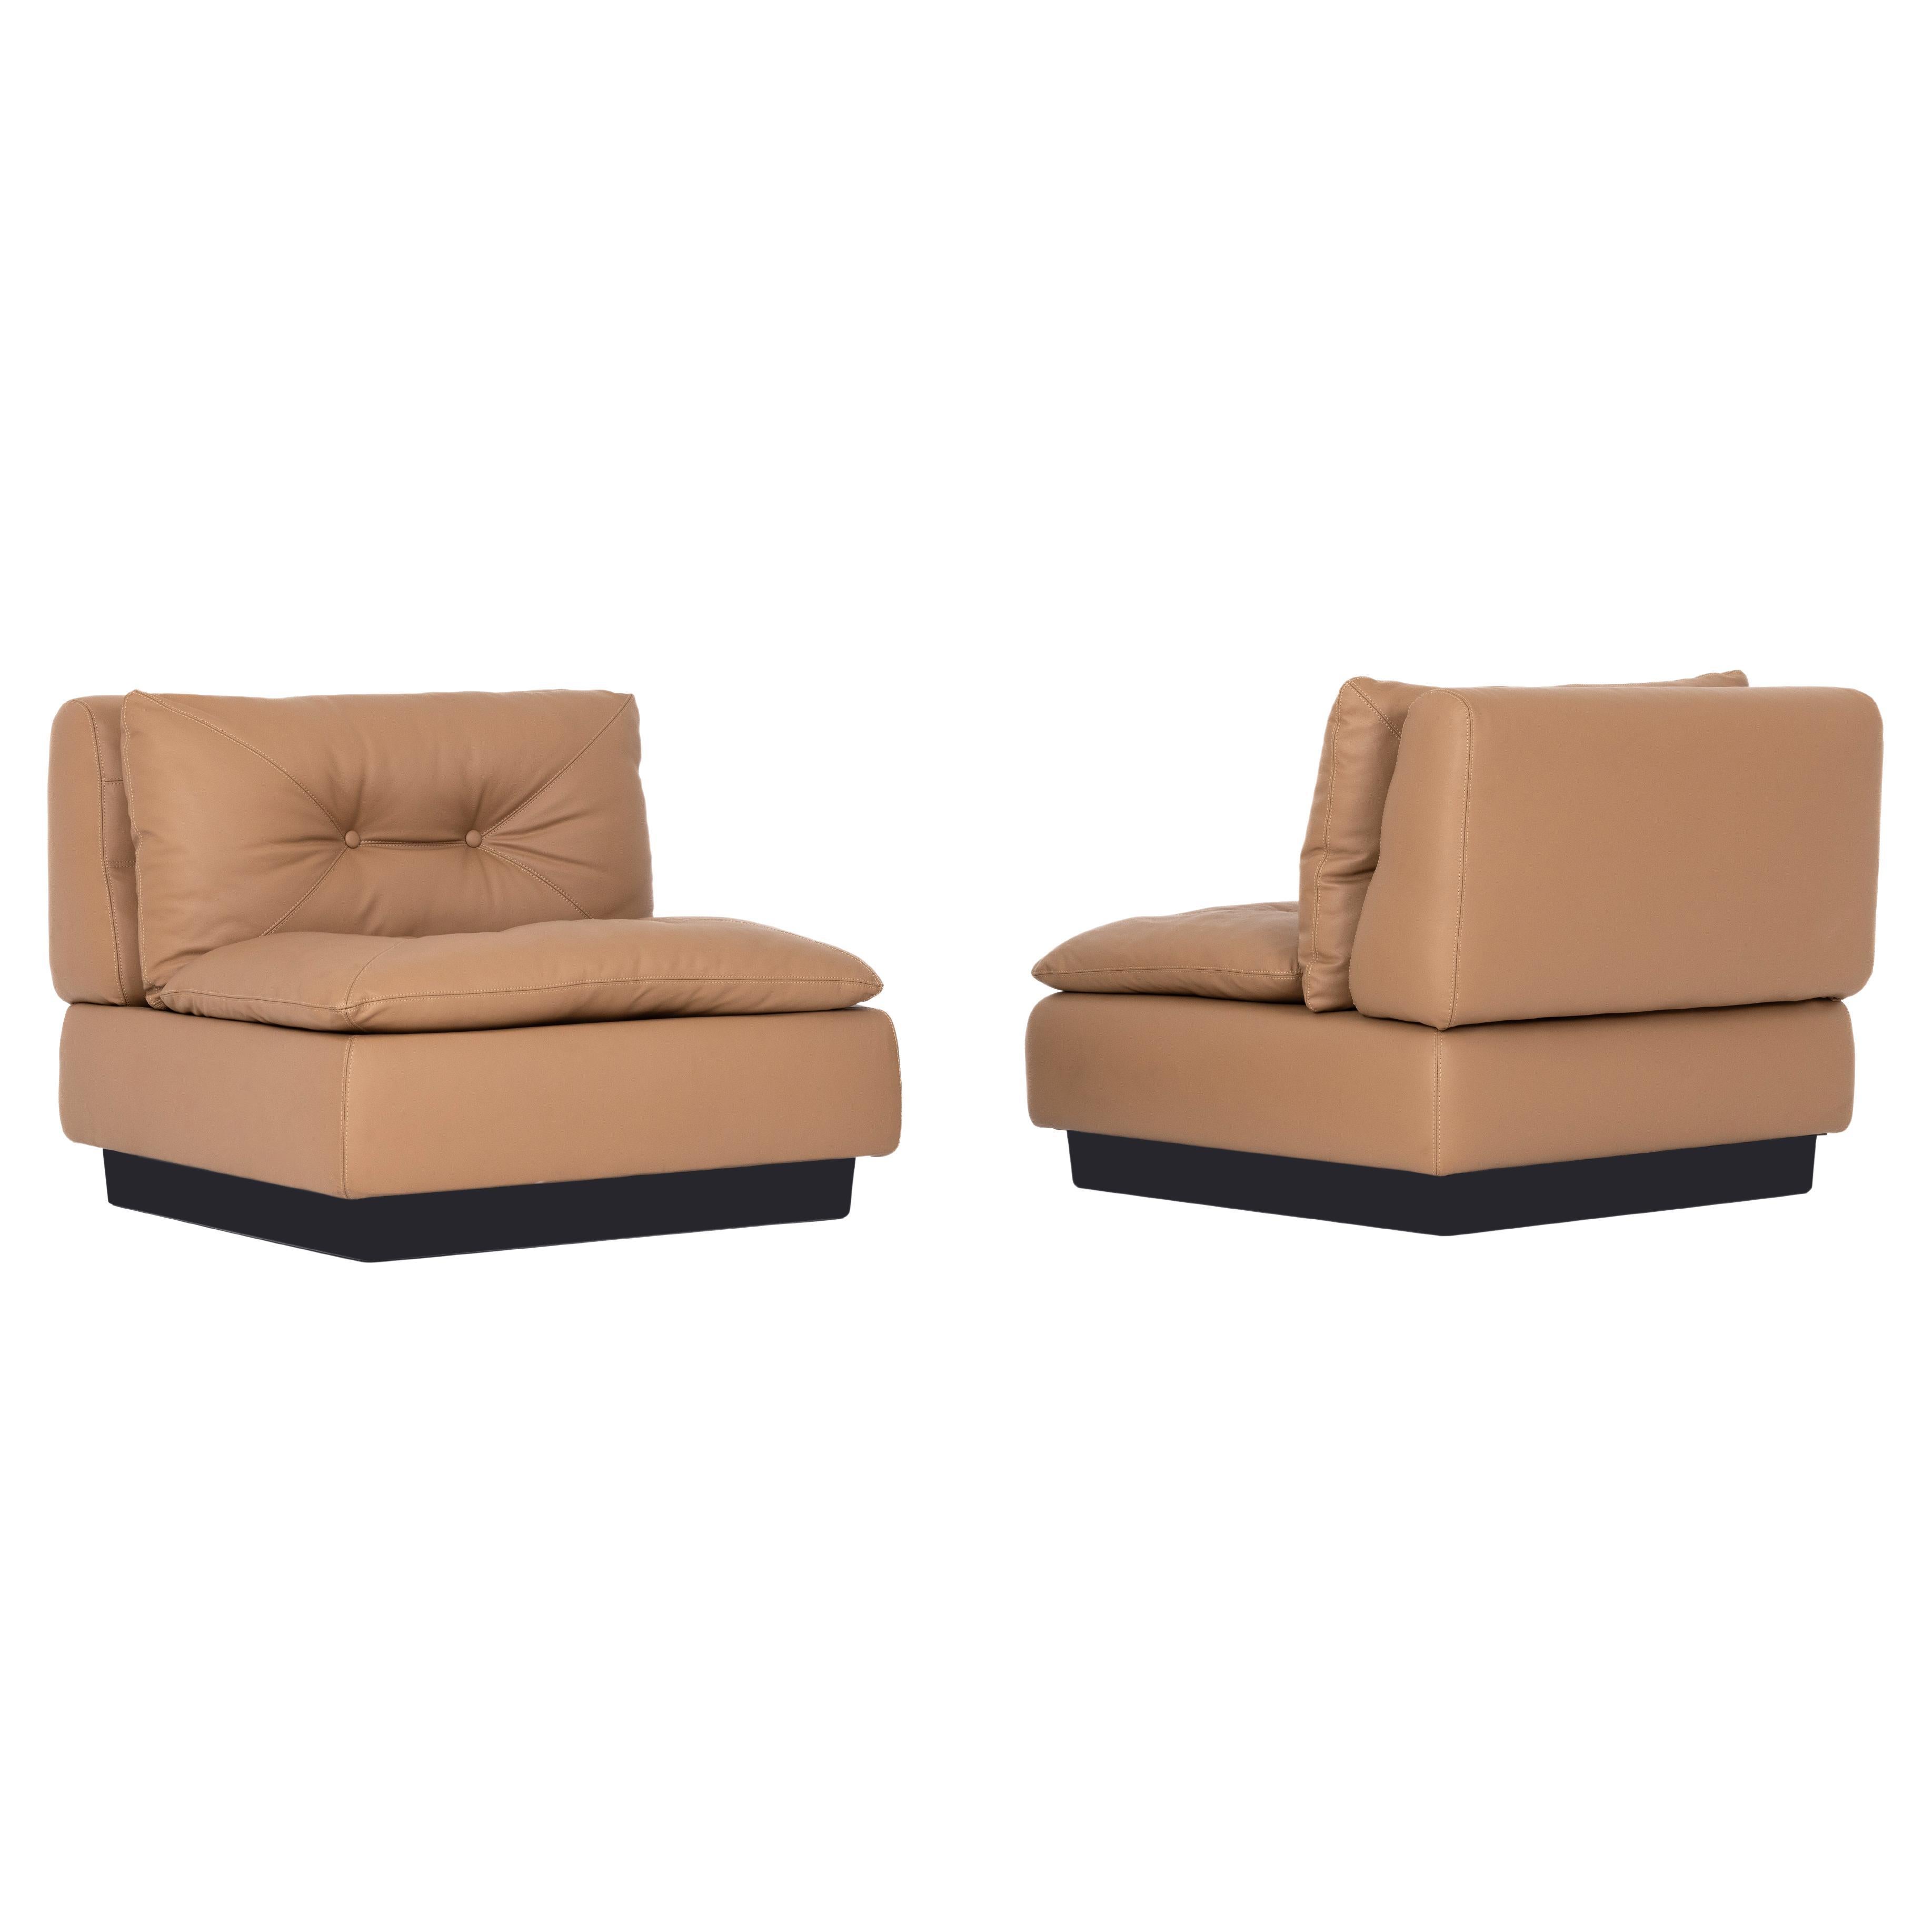 Pair of lounge chairs produced by Saporiti Italia, Italy 1970s, entirely restored and reupholstered with premium Italian leather